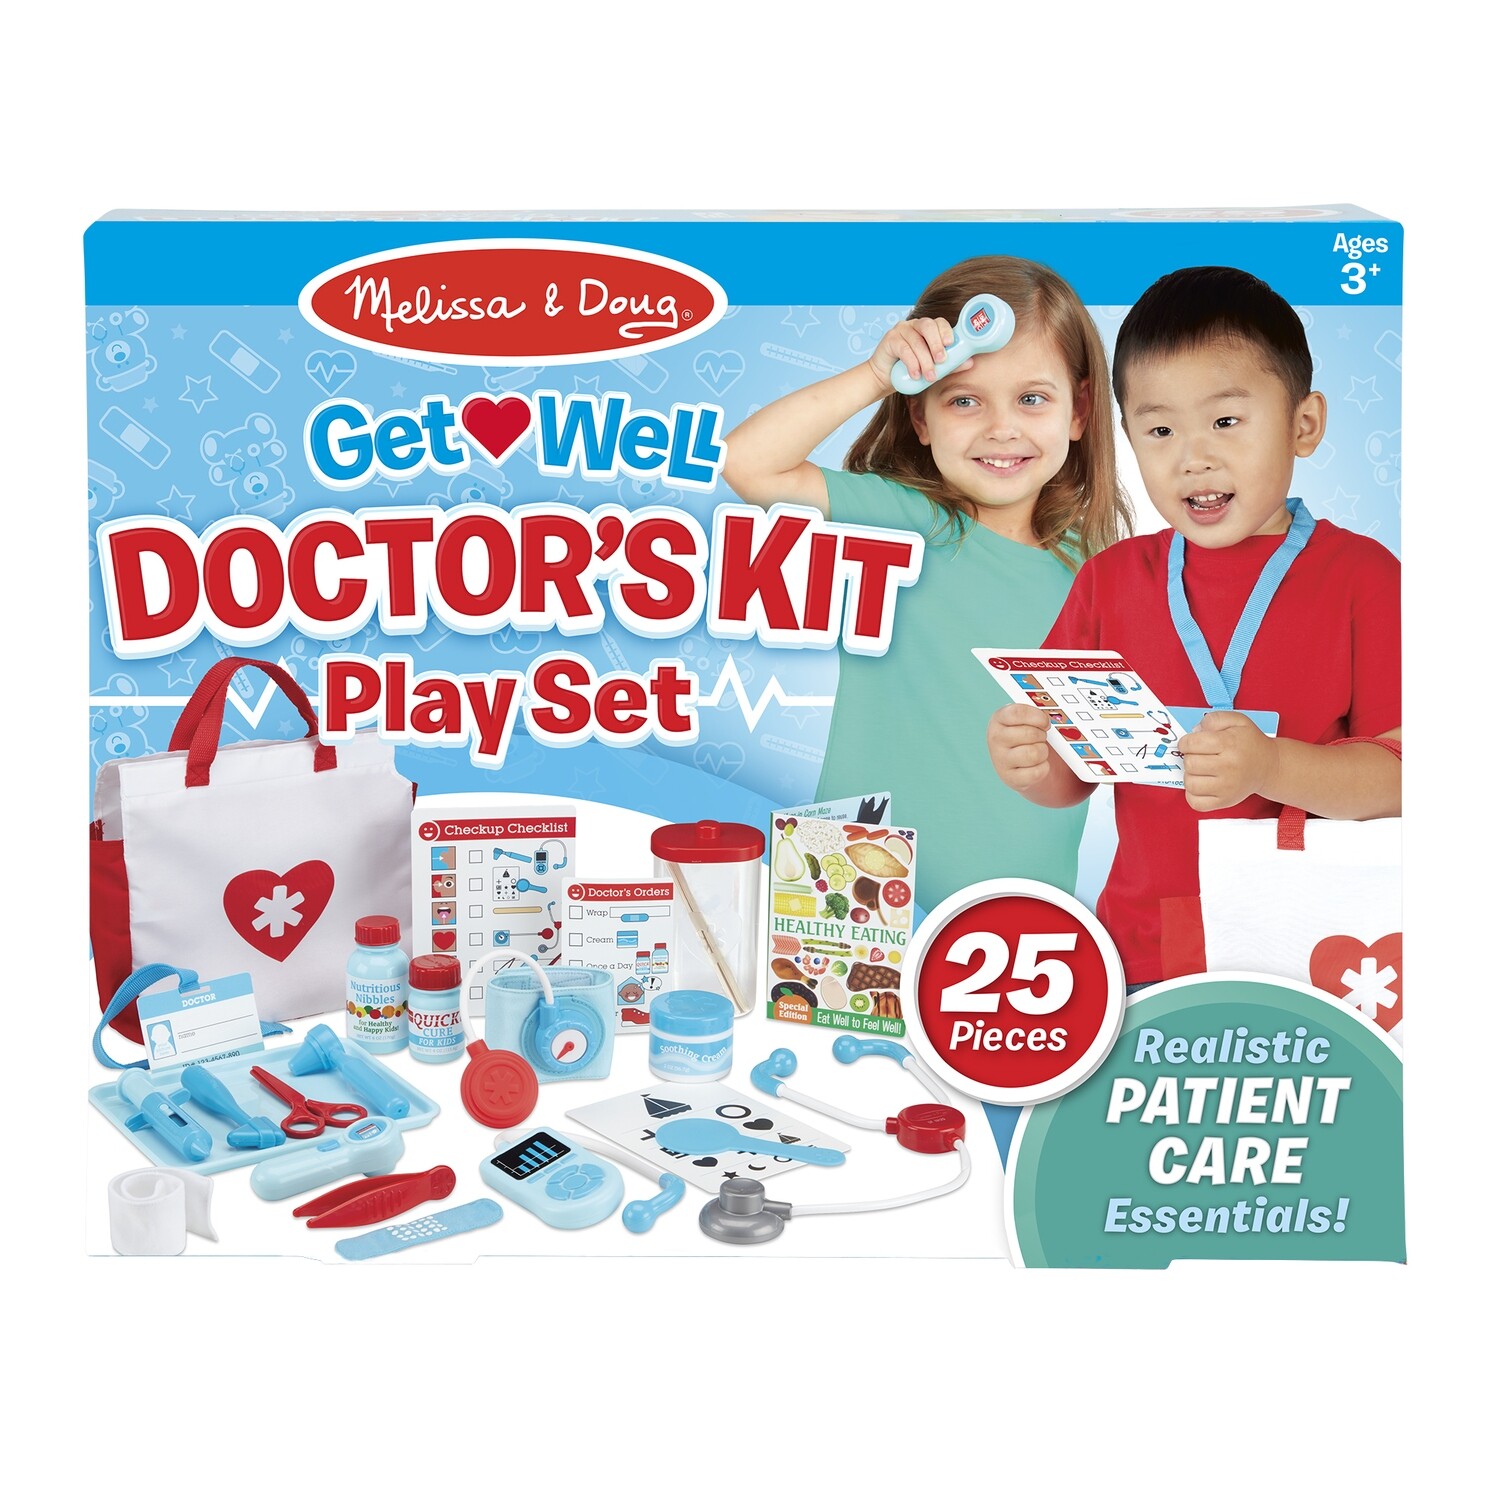 Get Well Doctor Kid Play Set